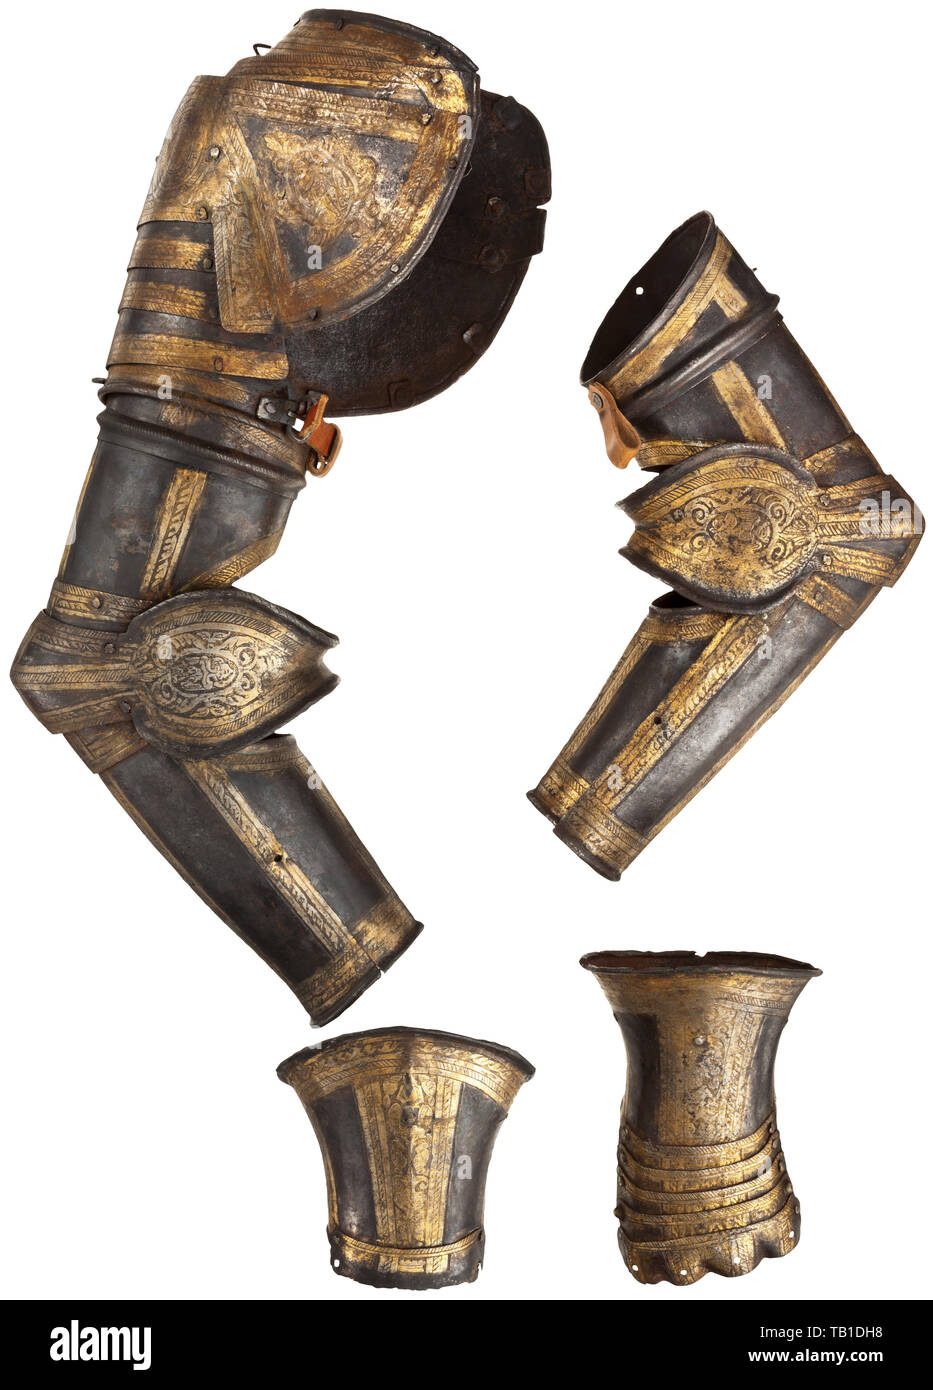 A pair of North Italian etched and gilt arm defences and gauntlets, circa 1580-90, Comprising a full defence for the right arm, with large spaulder of seven lames attached to the turner by a turning-pin on the outer face and by a strap on the inner face, tubular upper-cannon, bracelet couter, and hinged lower-cannon, the defence for the left arm identical but now missing the spaulder, and each with a pair of gauntlets en suite with the arms. etched throughout with cabled bands of trophies, monsters, masks and grotesques on a contrasting stippled , Additional-Rights-Clearance-Info-Not-Available Stock Photo